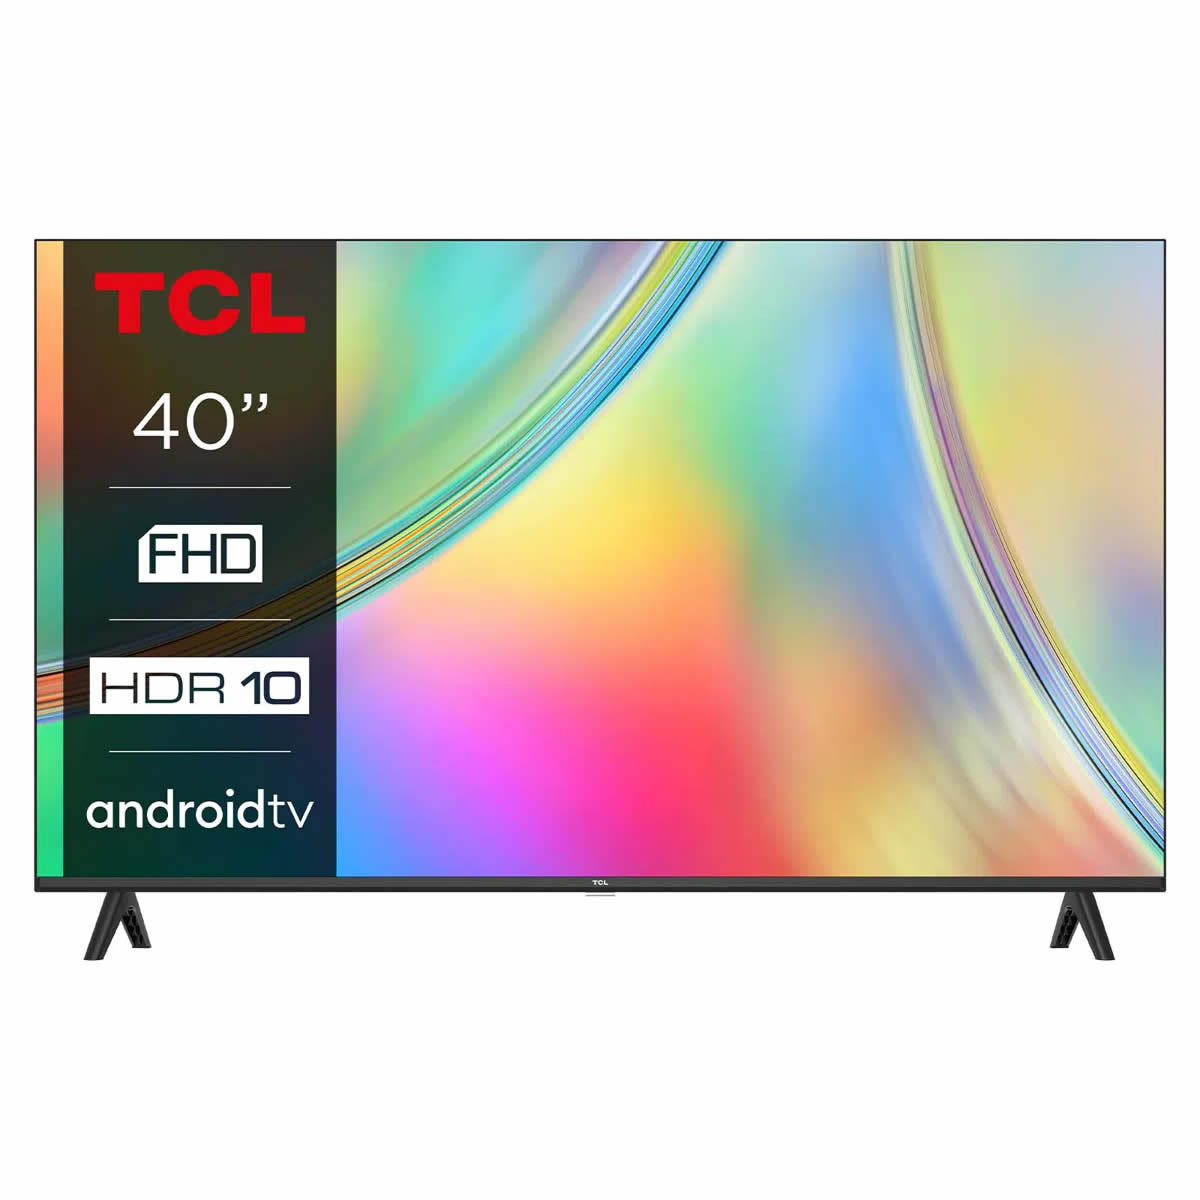 TCL 40inch HD LED SMART TV Android Wi-Fi